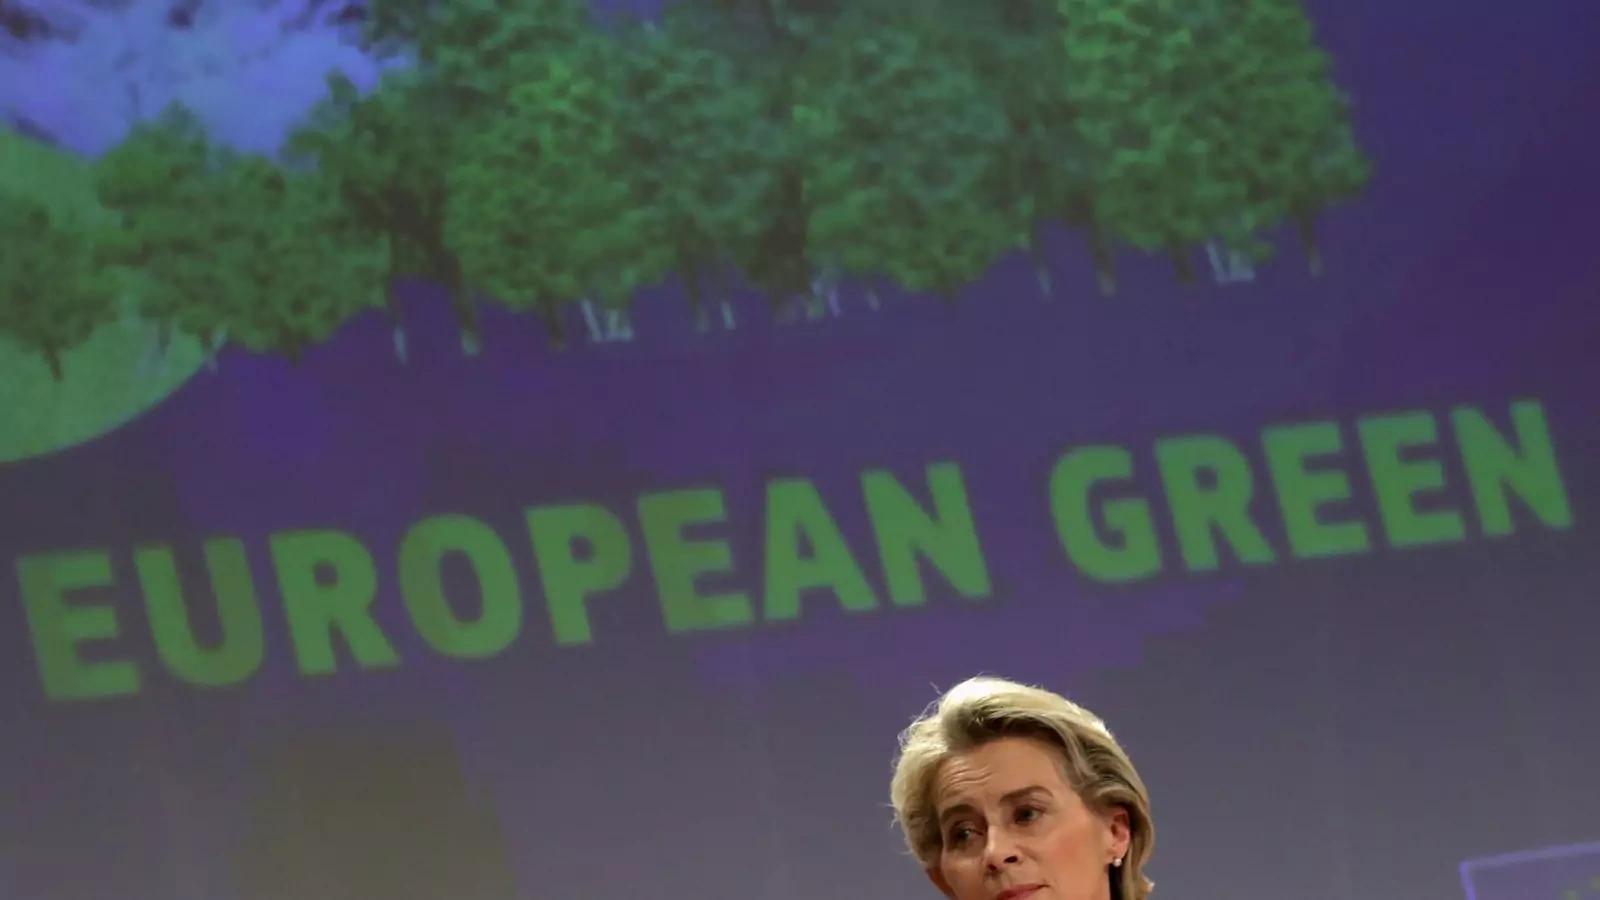 European Commission President Ursula von der Leyen looks on during a news conference to present the EU's new climate policy proposals in Brussels, Belgium on July 14, 2021. 